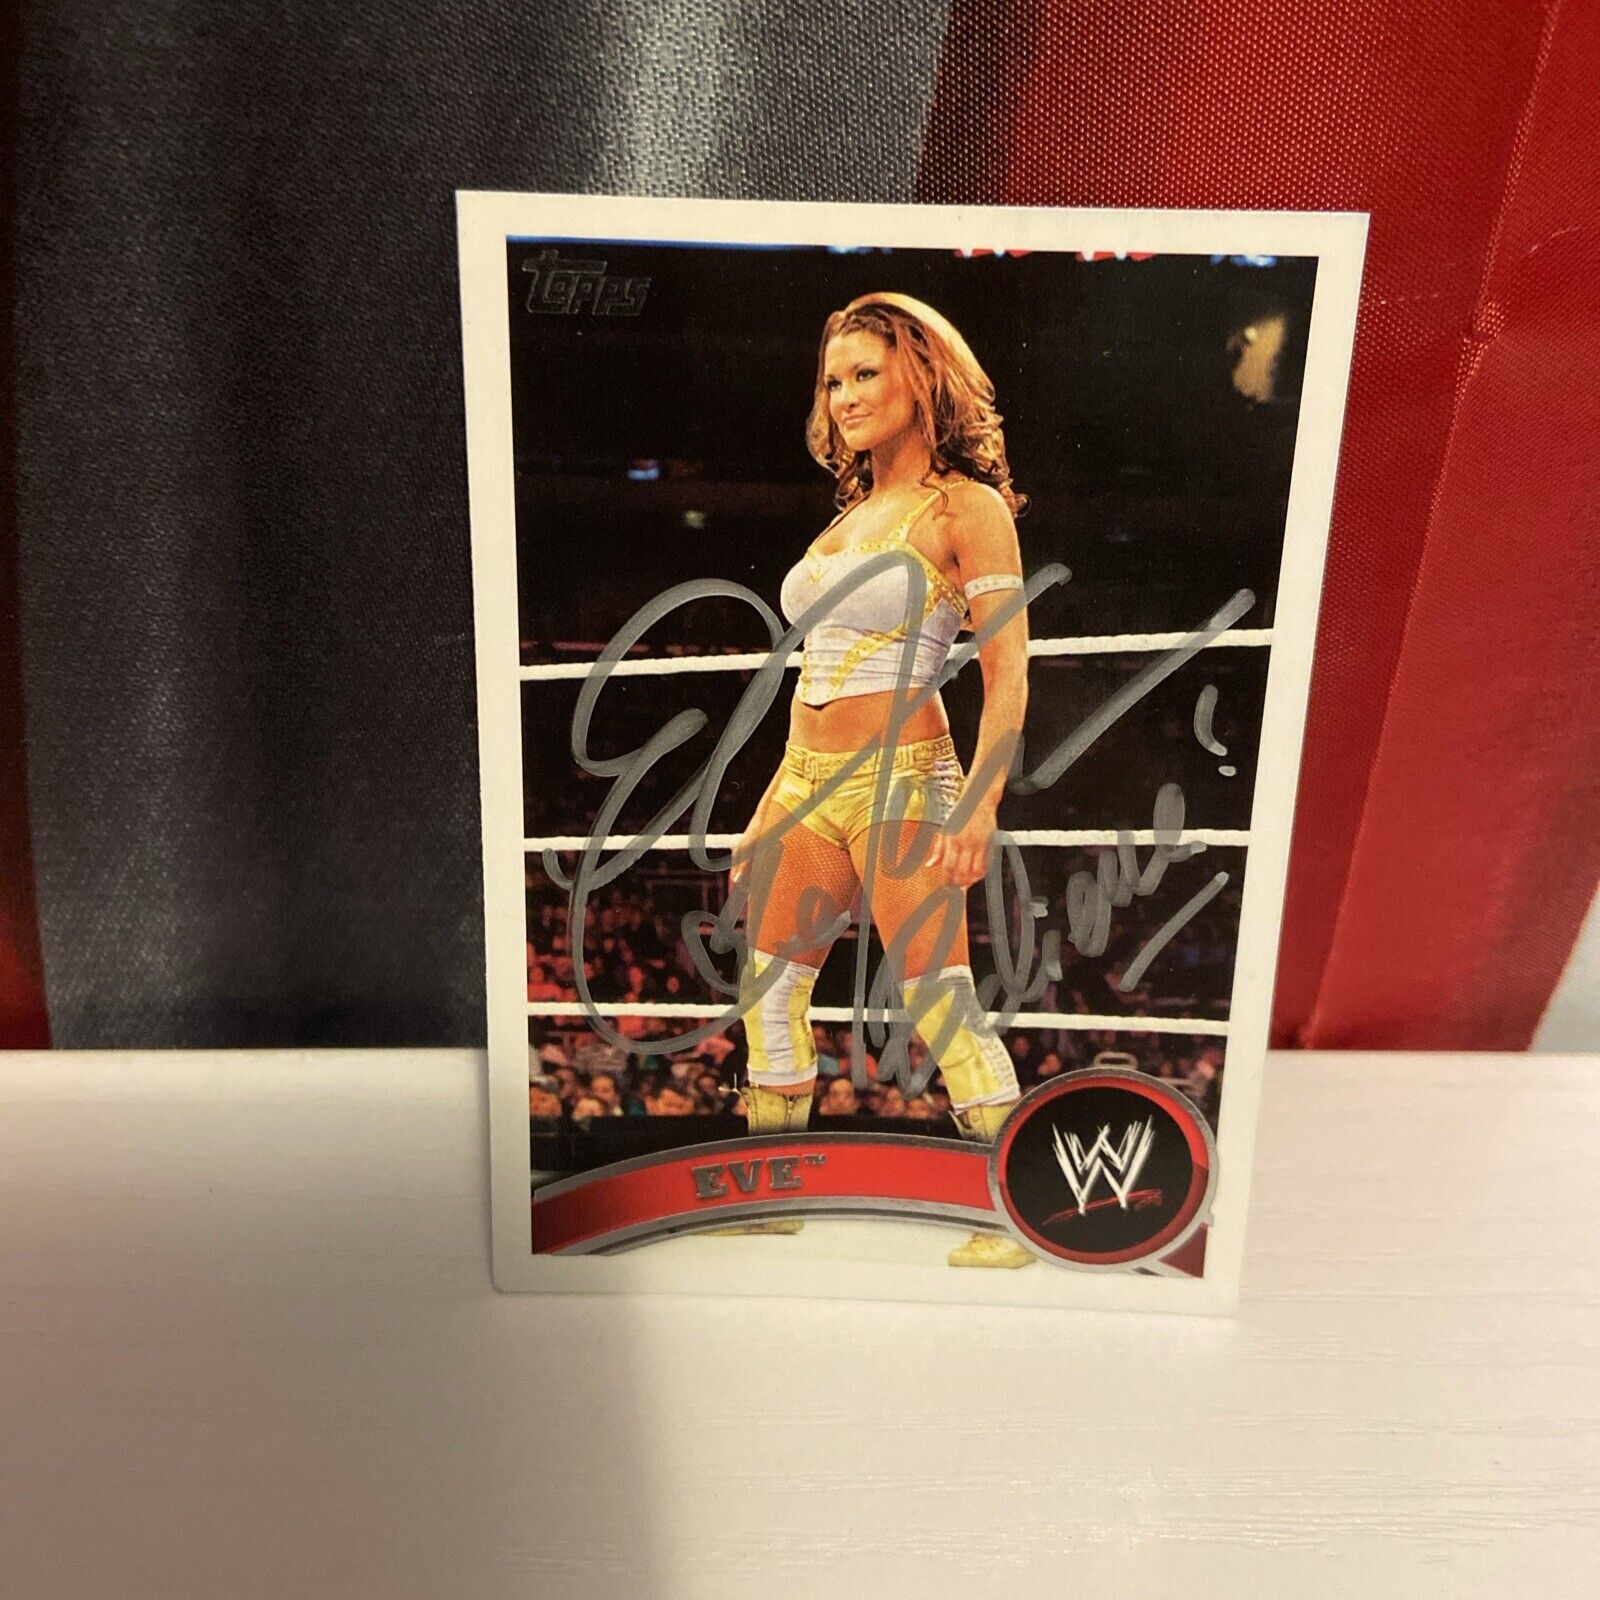 2011 TOPPS WWE WOMENS DIVISION AUTOGRAPH CARD EVE TORRES WWF AEW WCW